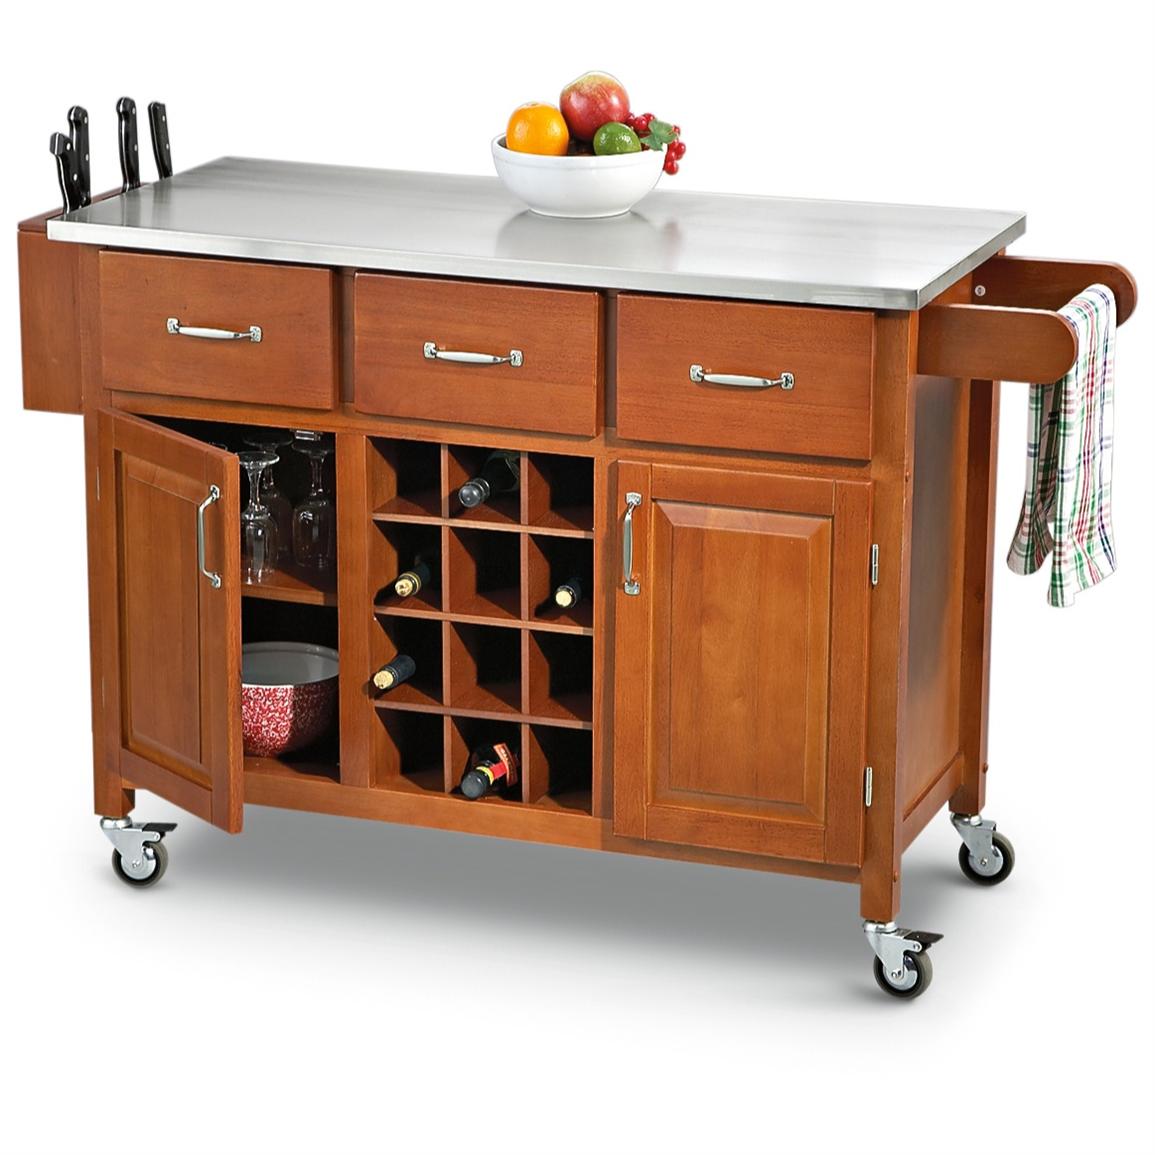 Stainless Steel - top Rolling Kitchen Cart - 203777, Kitchen & Dining Kitchen Cart Stainless Steel Top